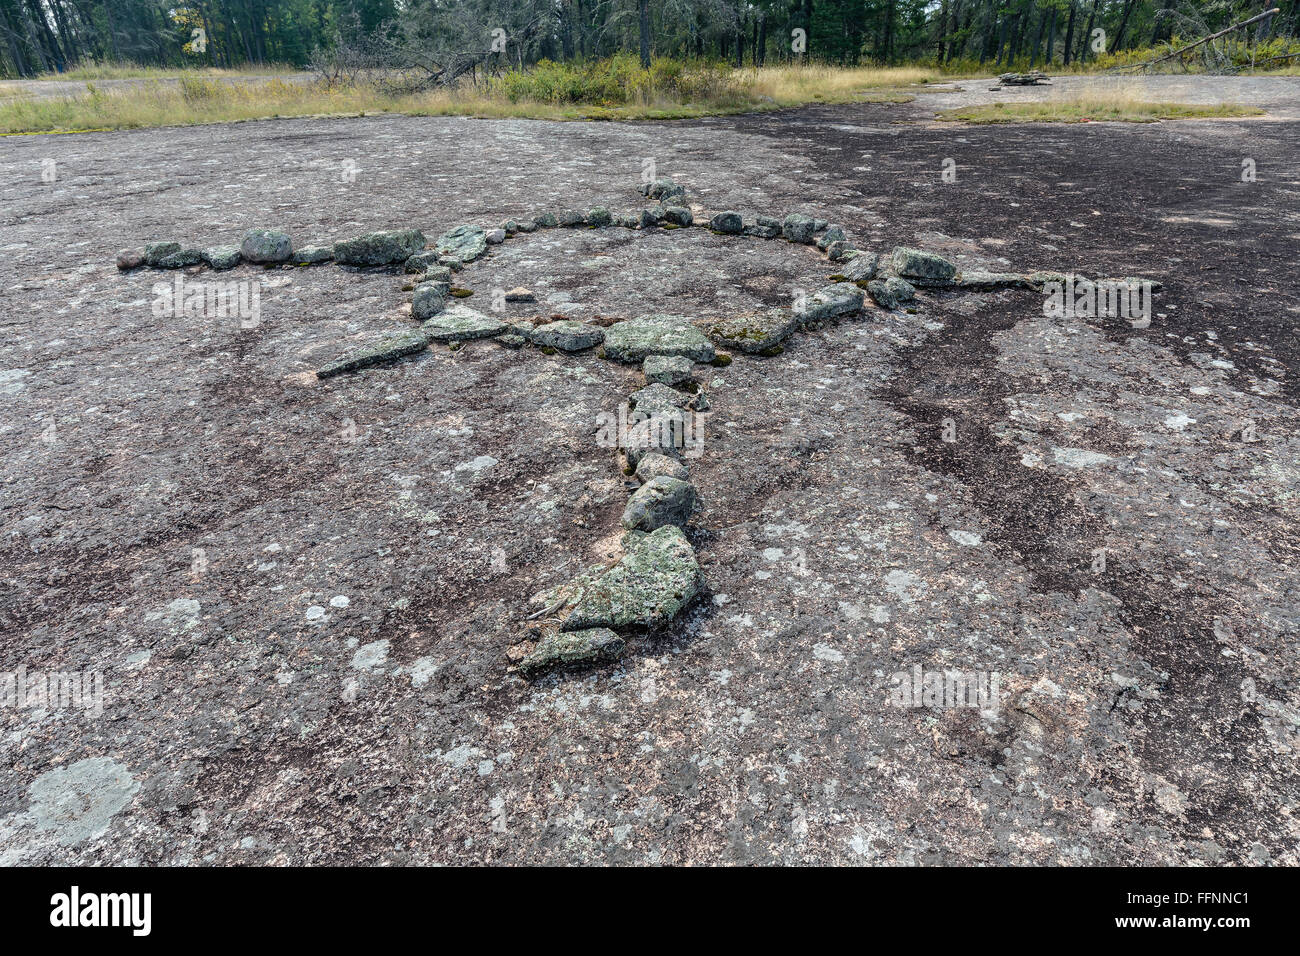 Petroform of a turtle at Bannock Point, an Ojibway aboriginal site, Whiteshell Provincial Park, Manitoba, Canada. Stock Photo